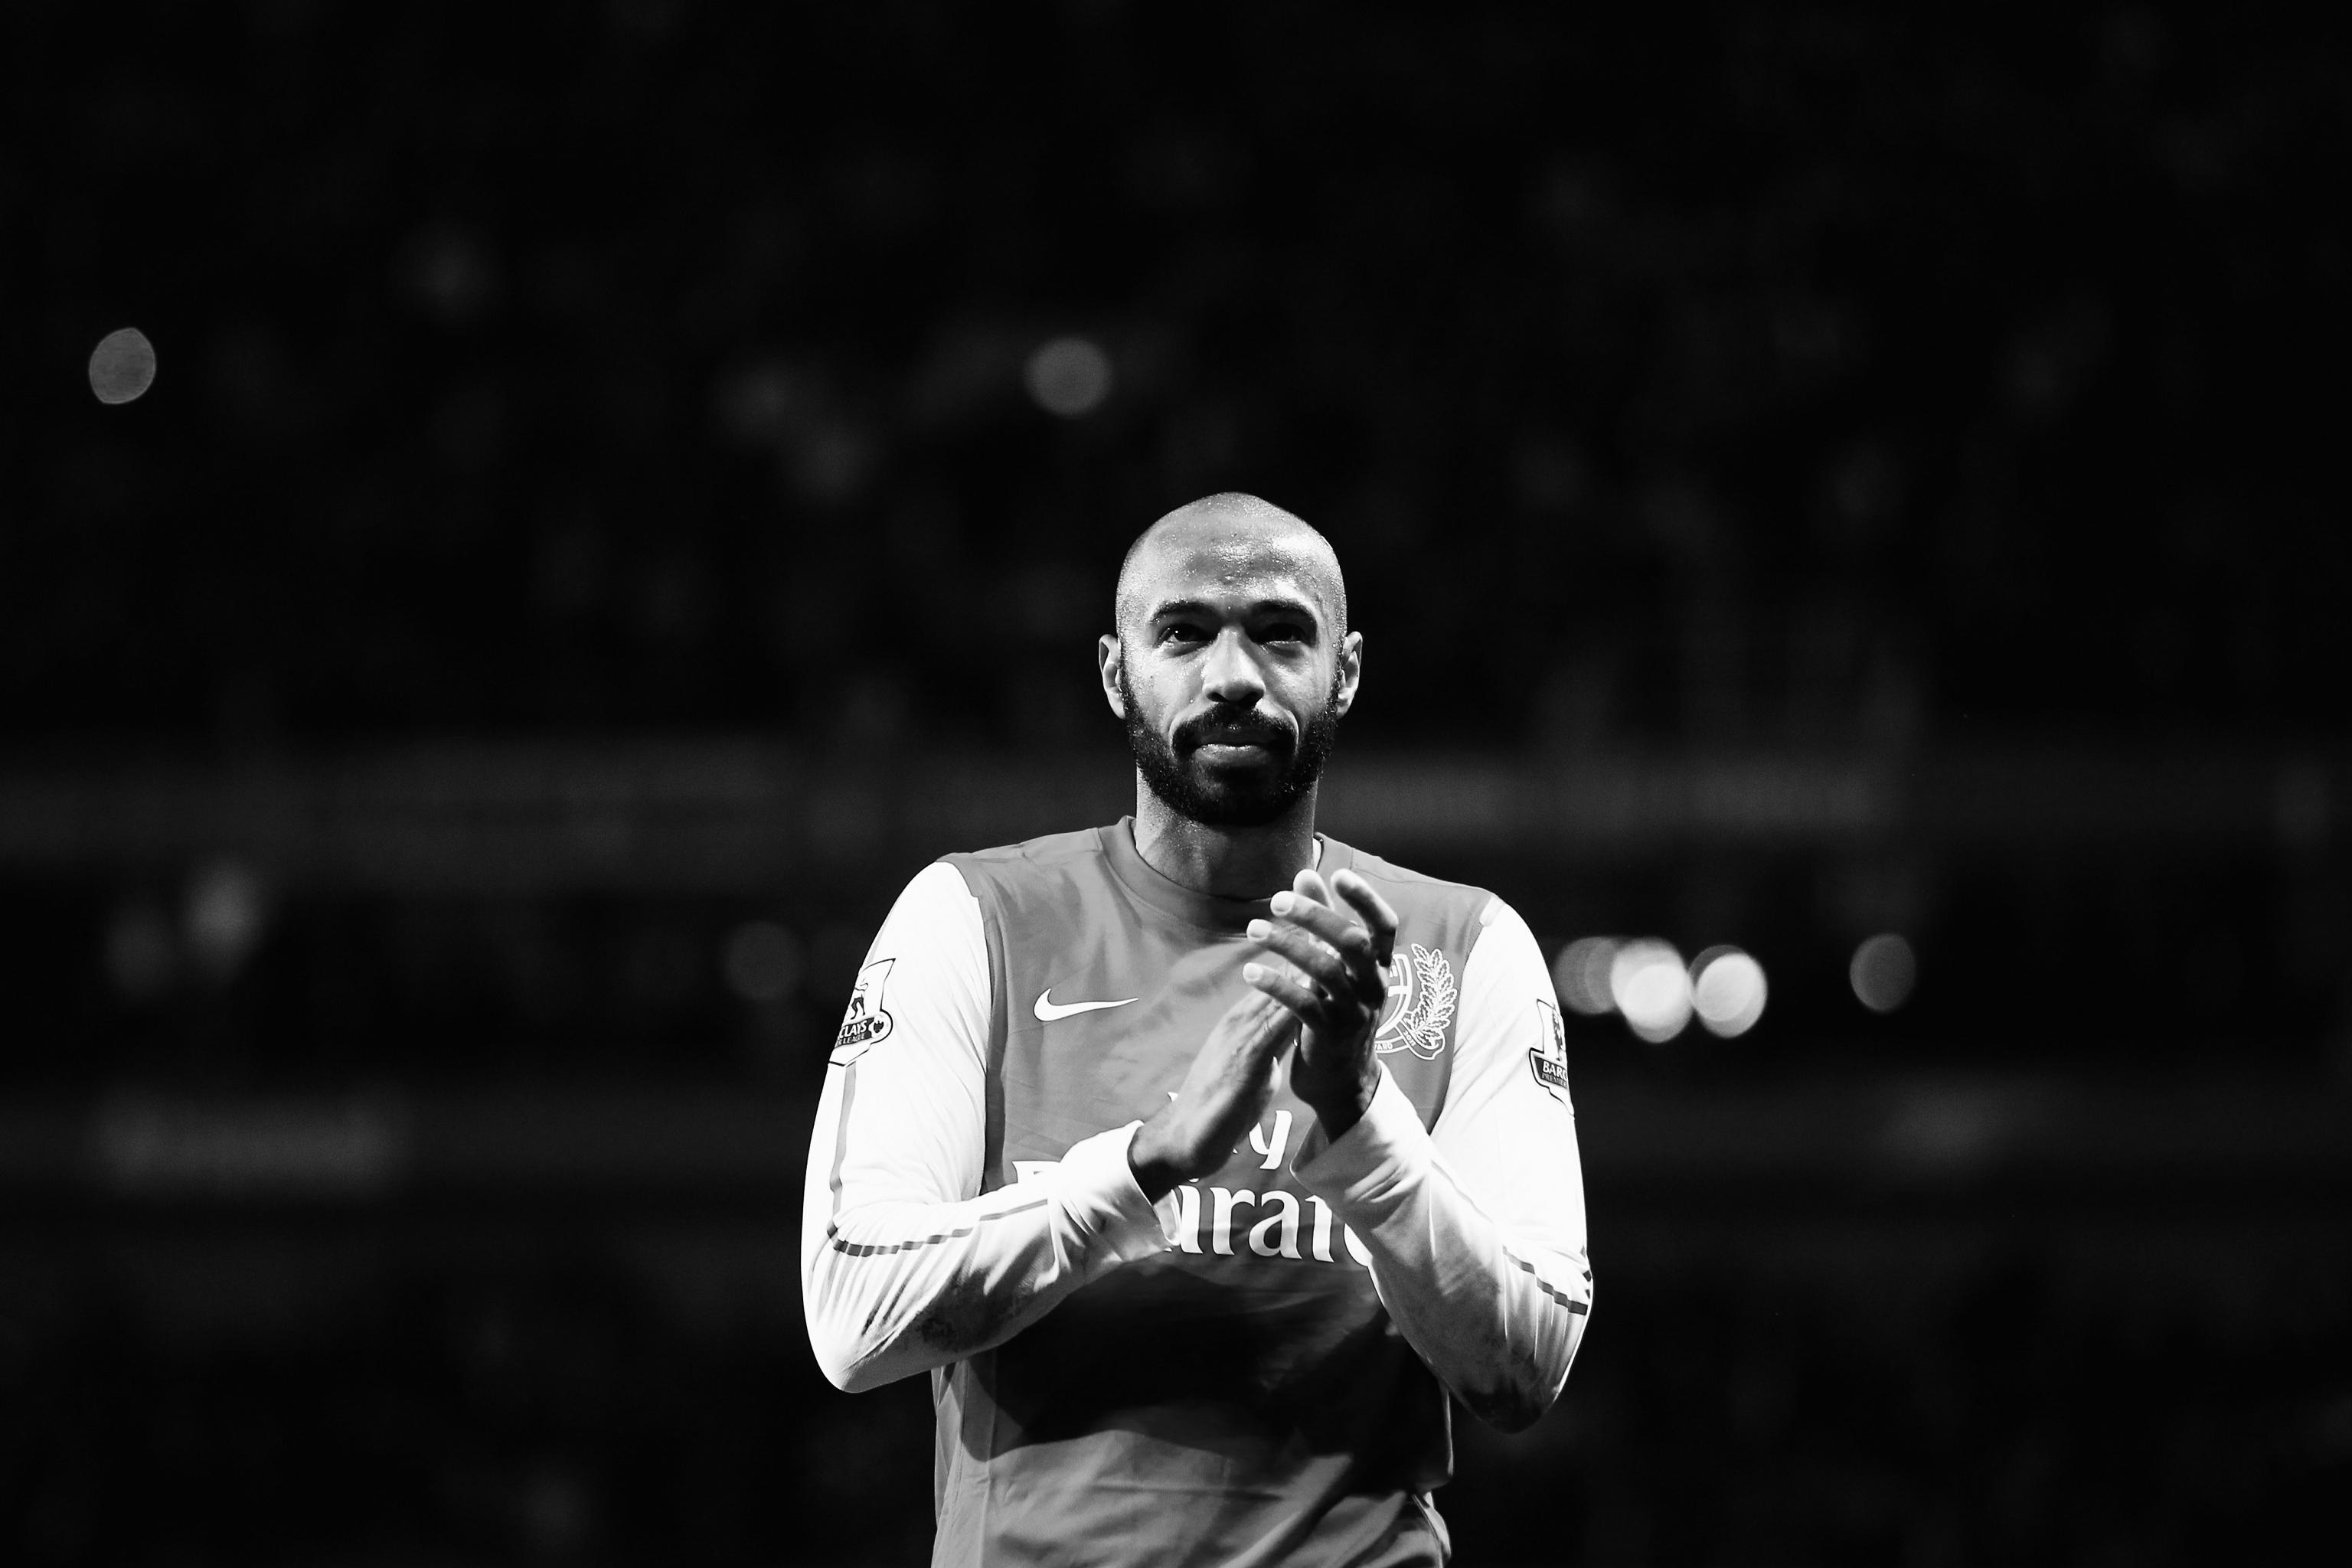 Arsenal legends like Thierry Henry are blasted by Gilles Grimandi